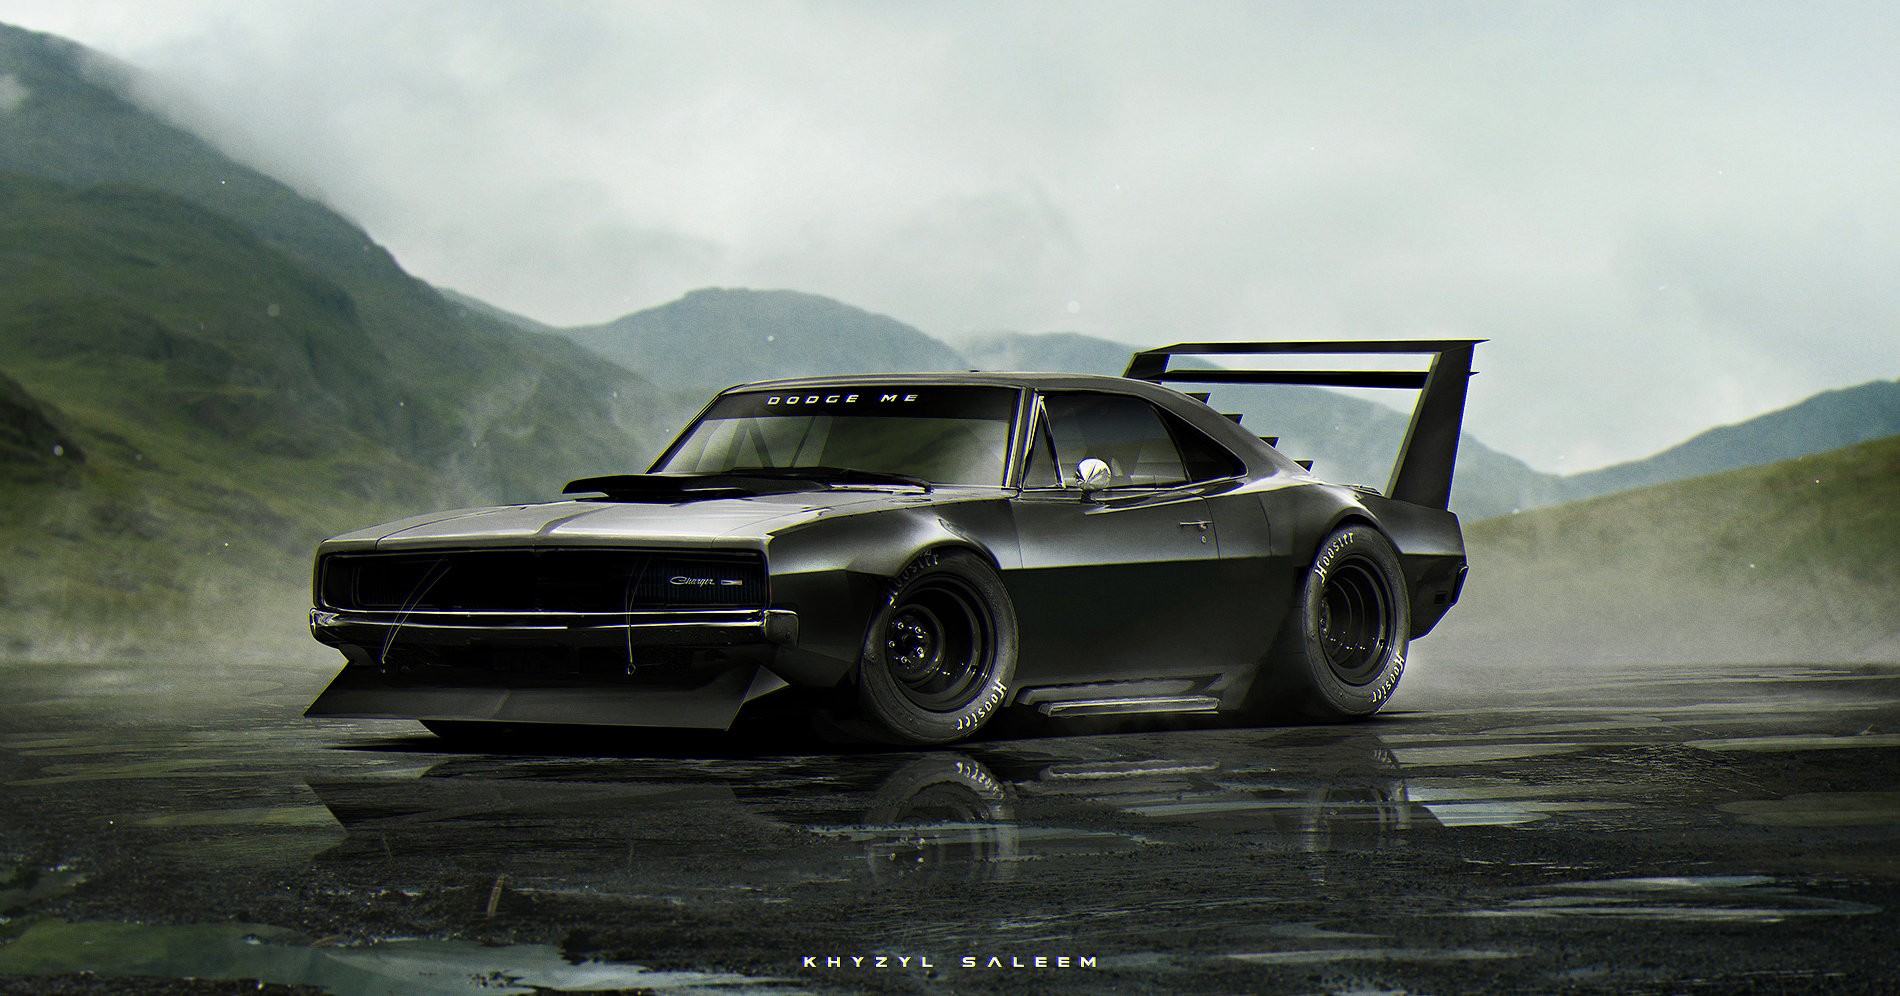 Dodge Charger, Khyzyl Saleem Wallpapers HD / Desktop and Mobile Backgrounds